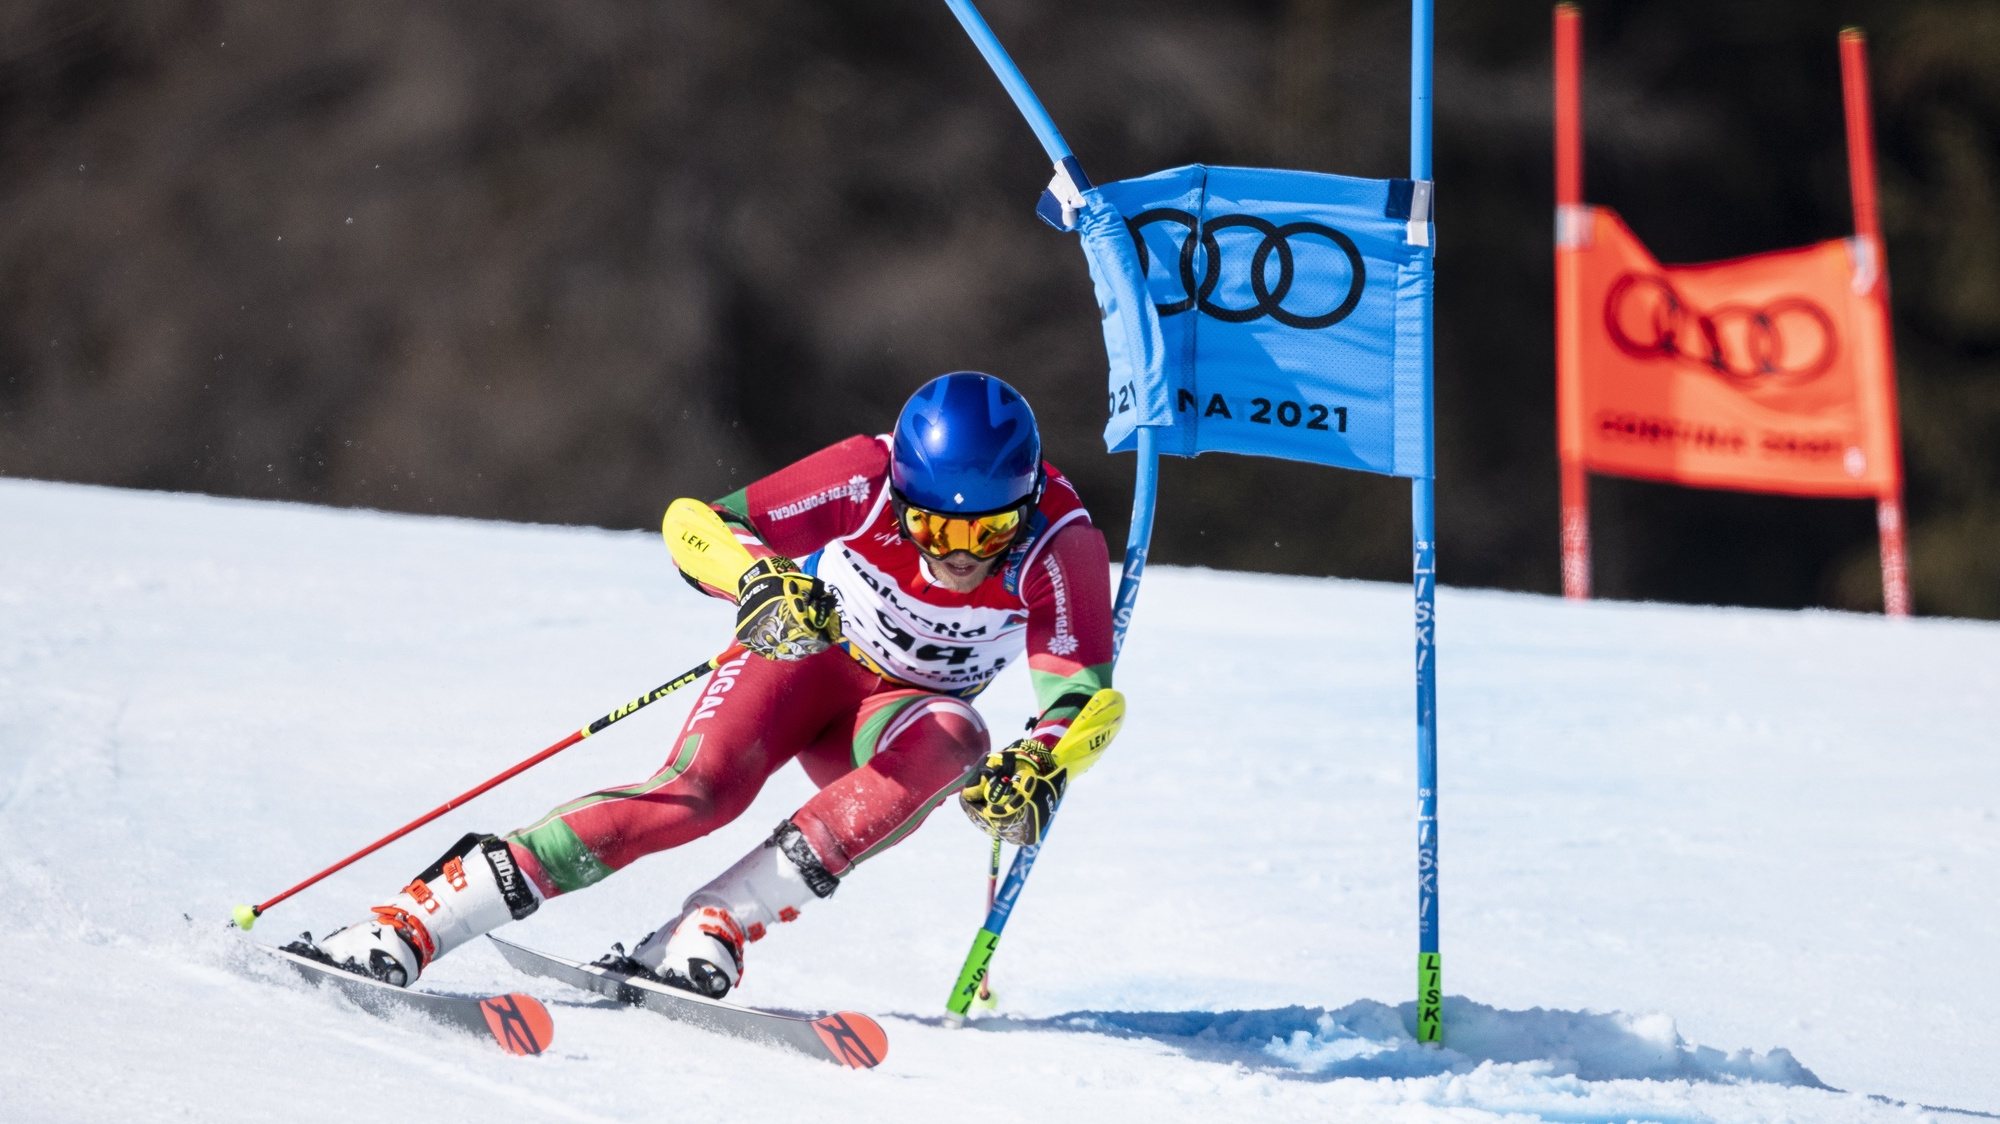 epa09023489 Ricardo Brancal of Portugal in action during the first run of the Men&#039;s Giant Slalom race at the FIS Alpine Skiing World Championships in Cortina d&#039;Ampezzo, Italy, 19 February 2021.  EPA/CHRISTIAN BRUNA